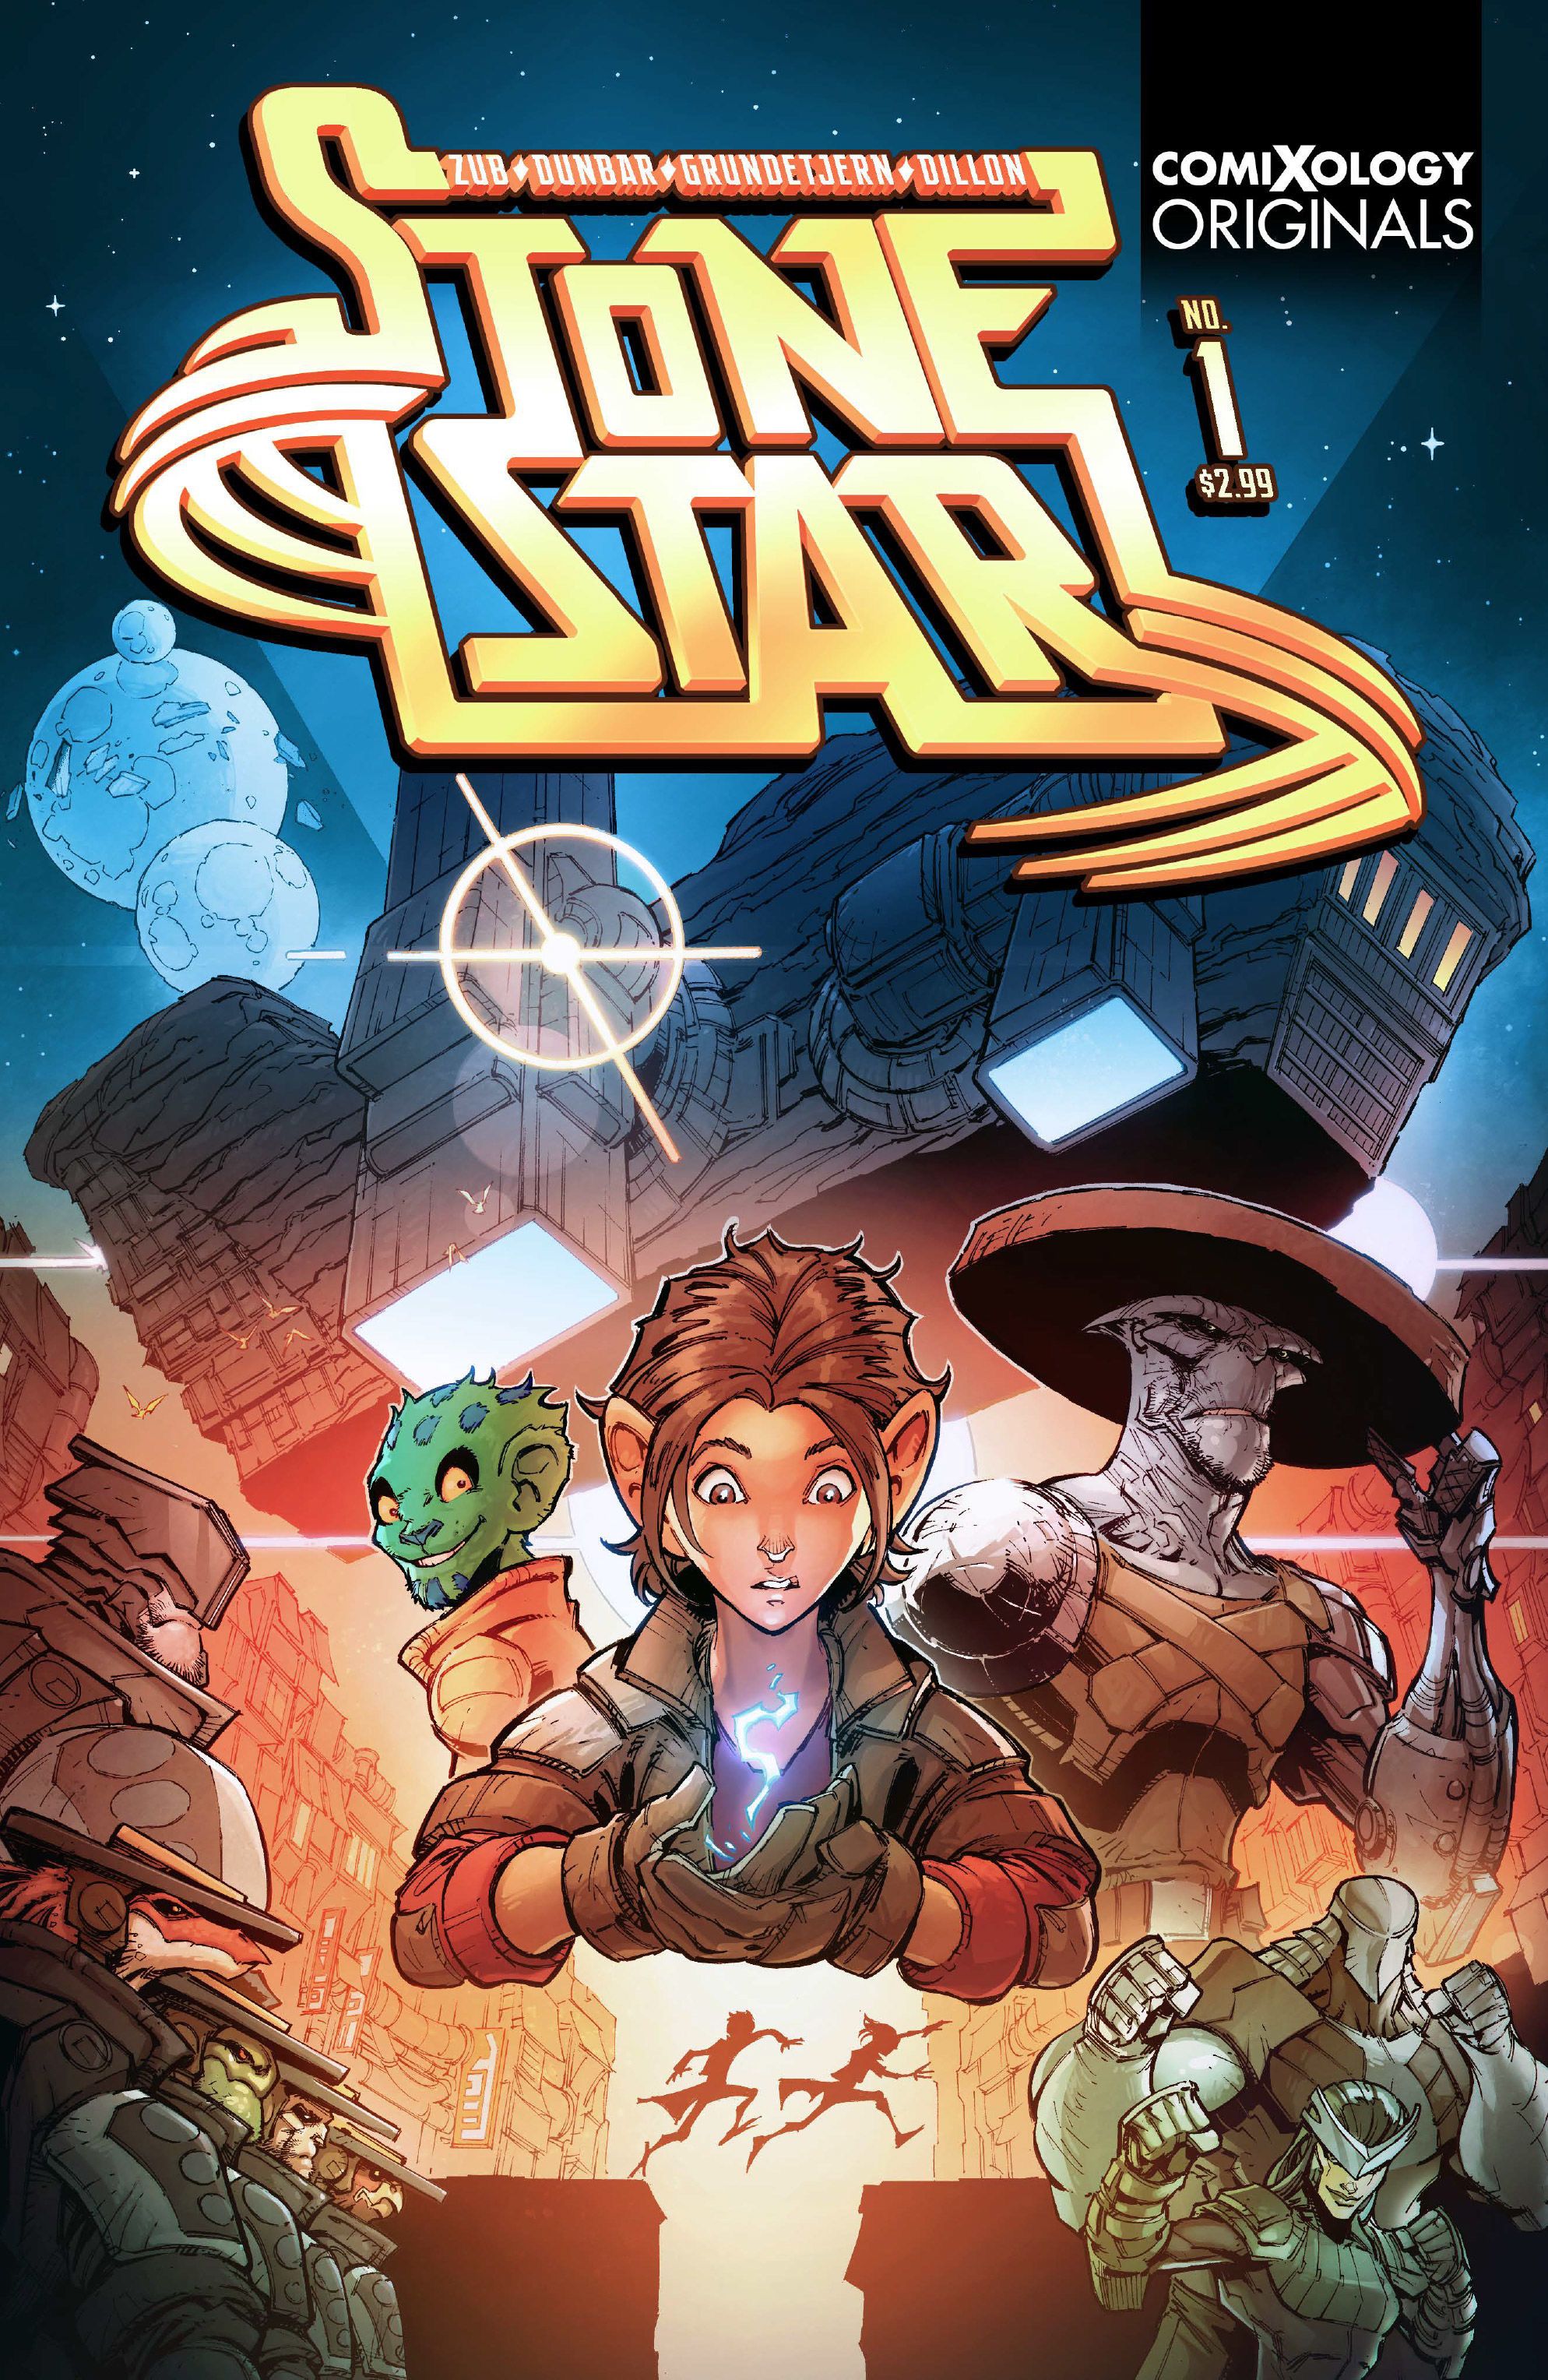 Stone Star #1 Cover